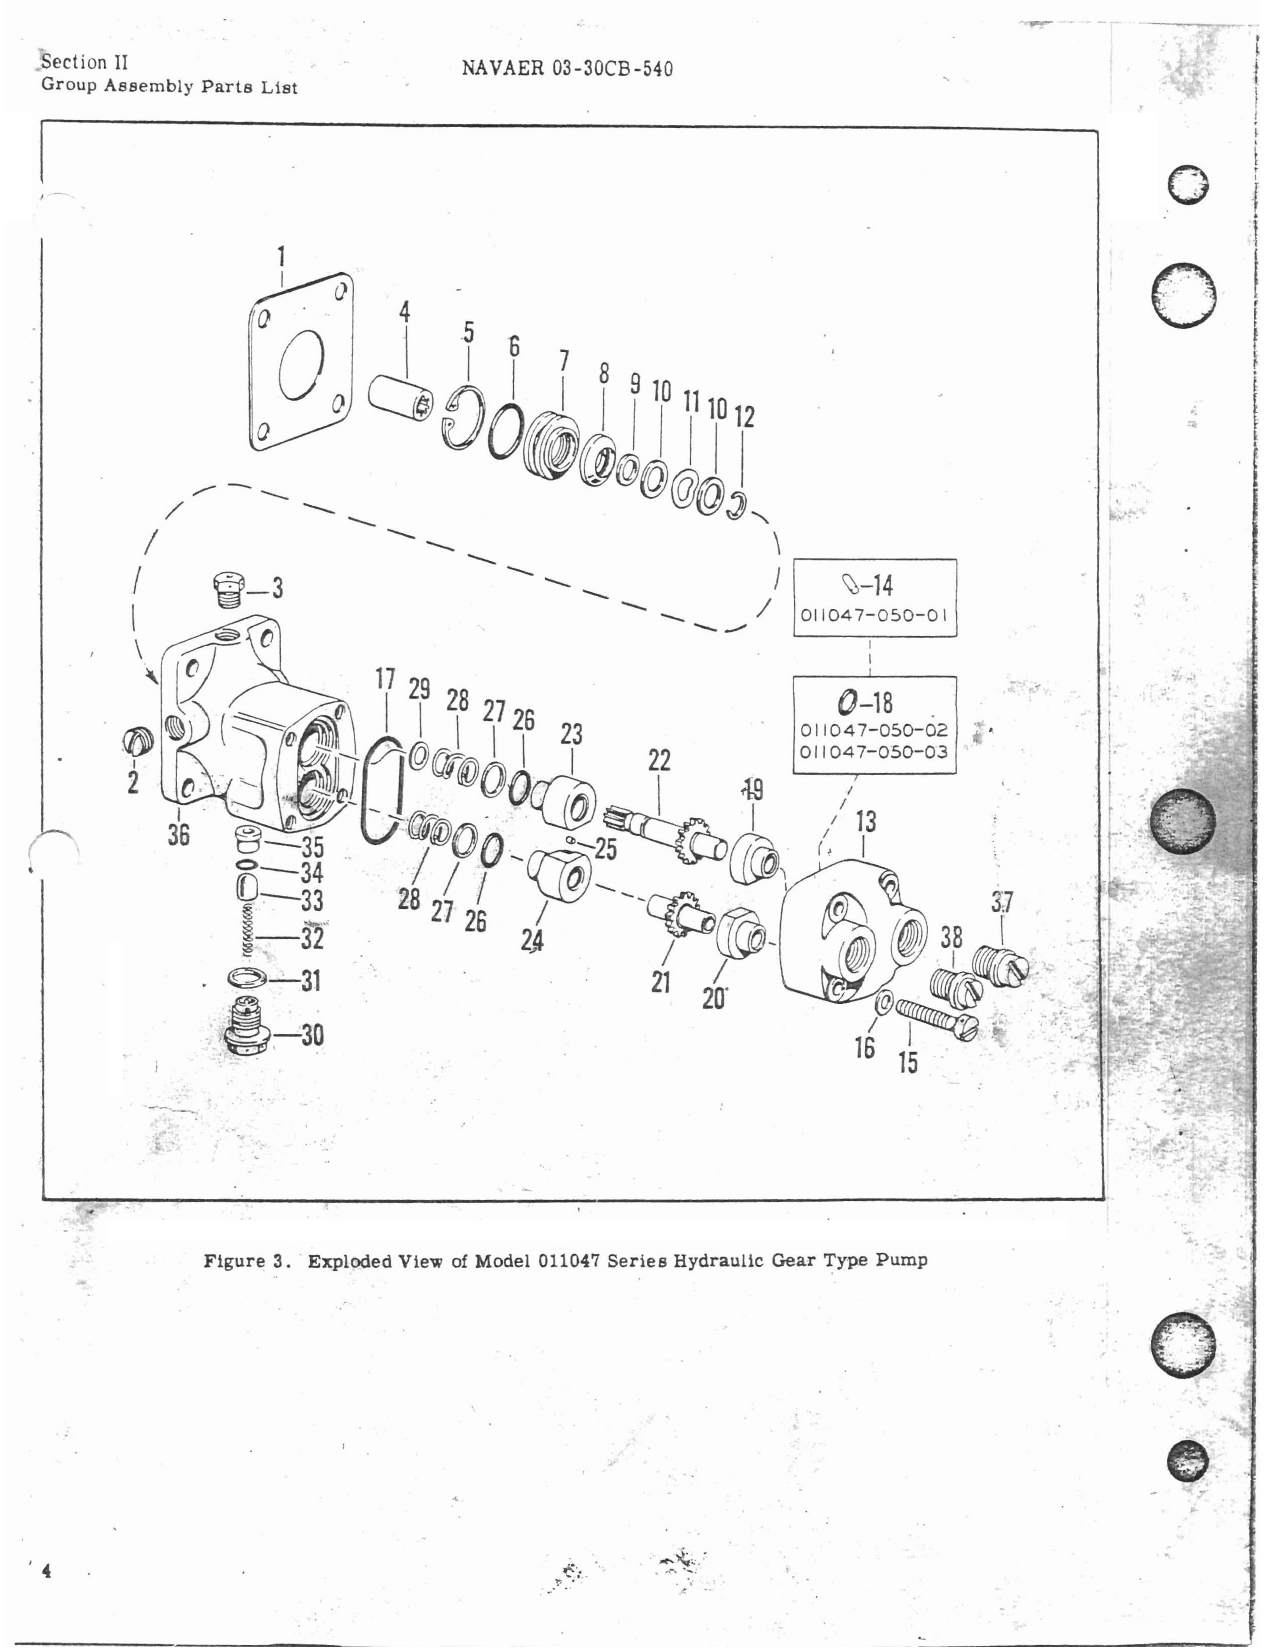 Sample page 7 from AirCorps Library document: Illustrated Parts Breakdown for Electric Motor-Driven Hydraulic Gear Type Pump - 111069 Series 